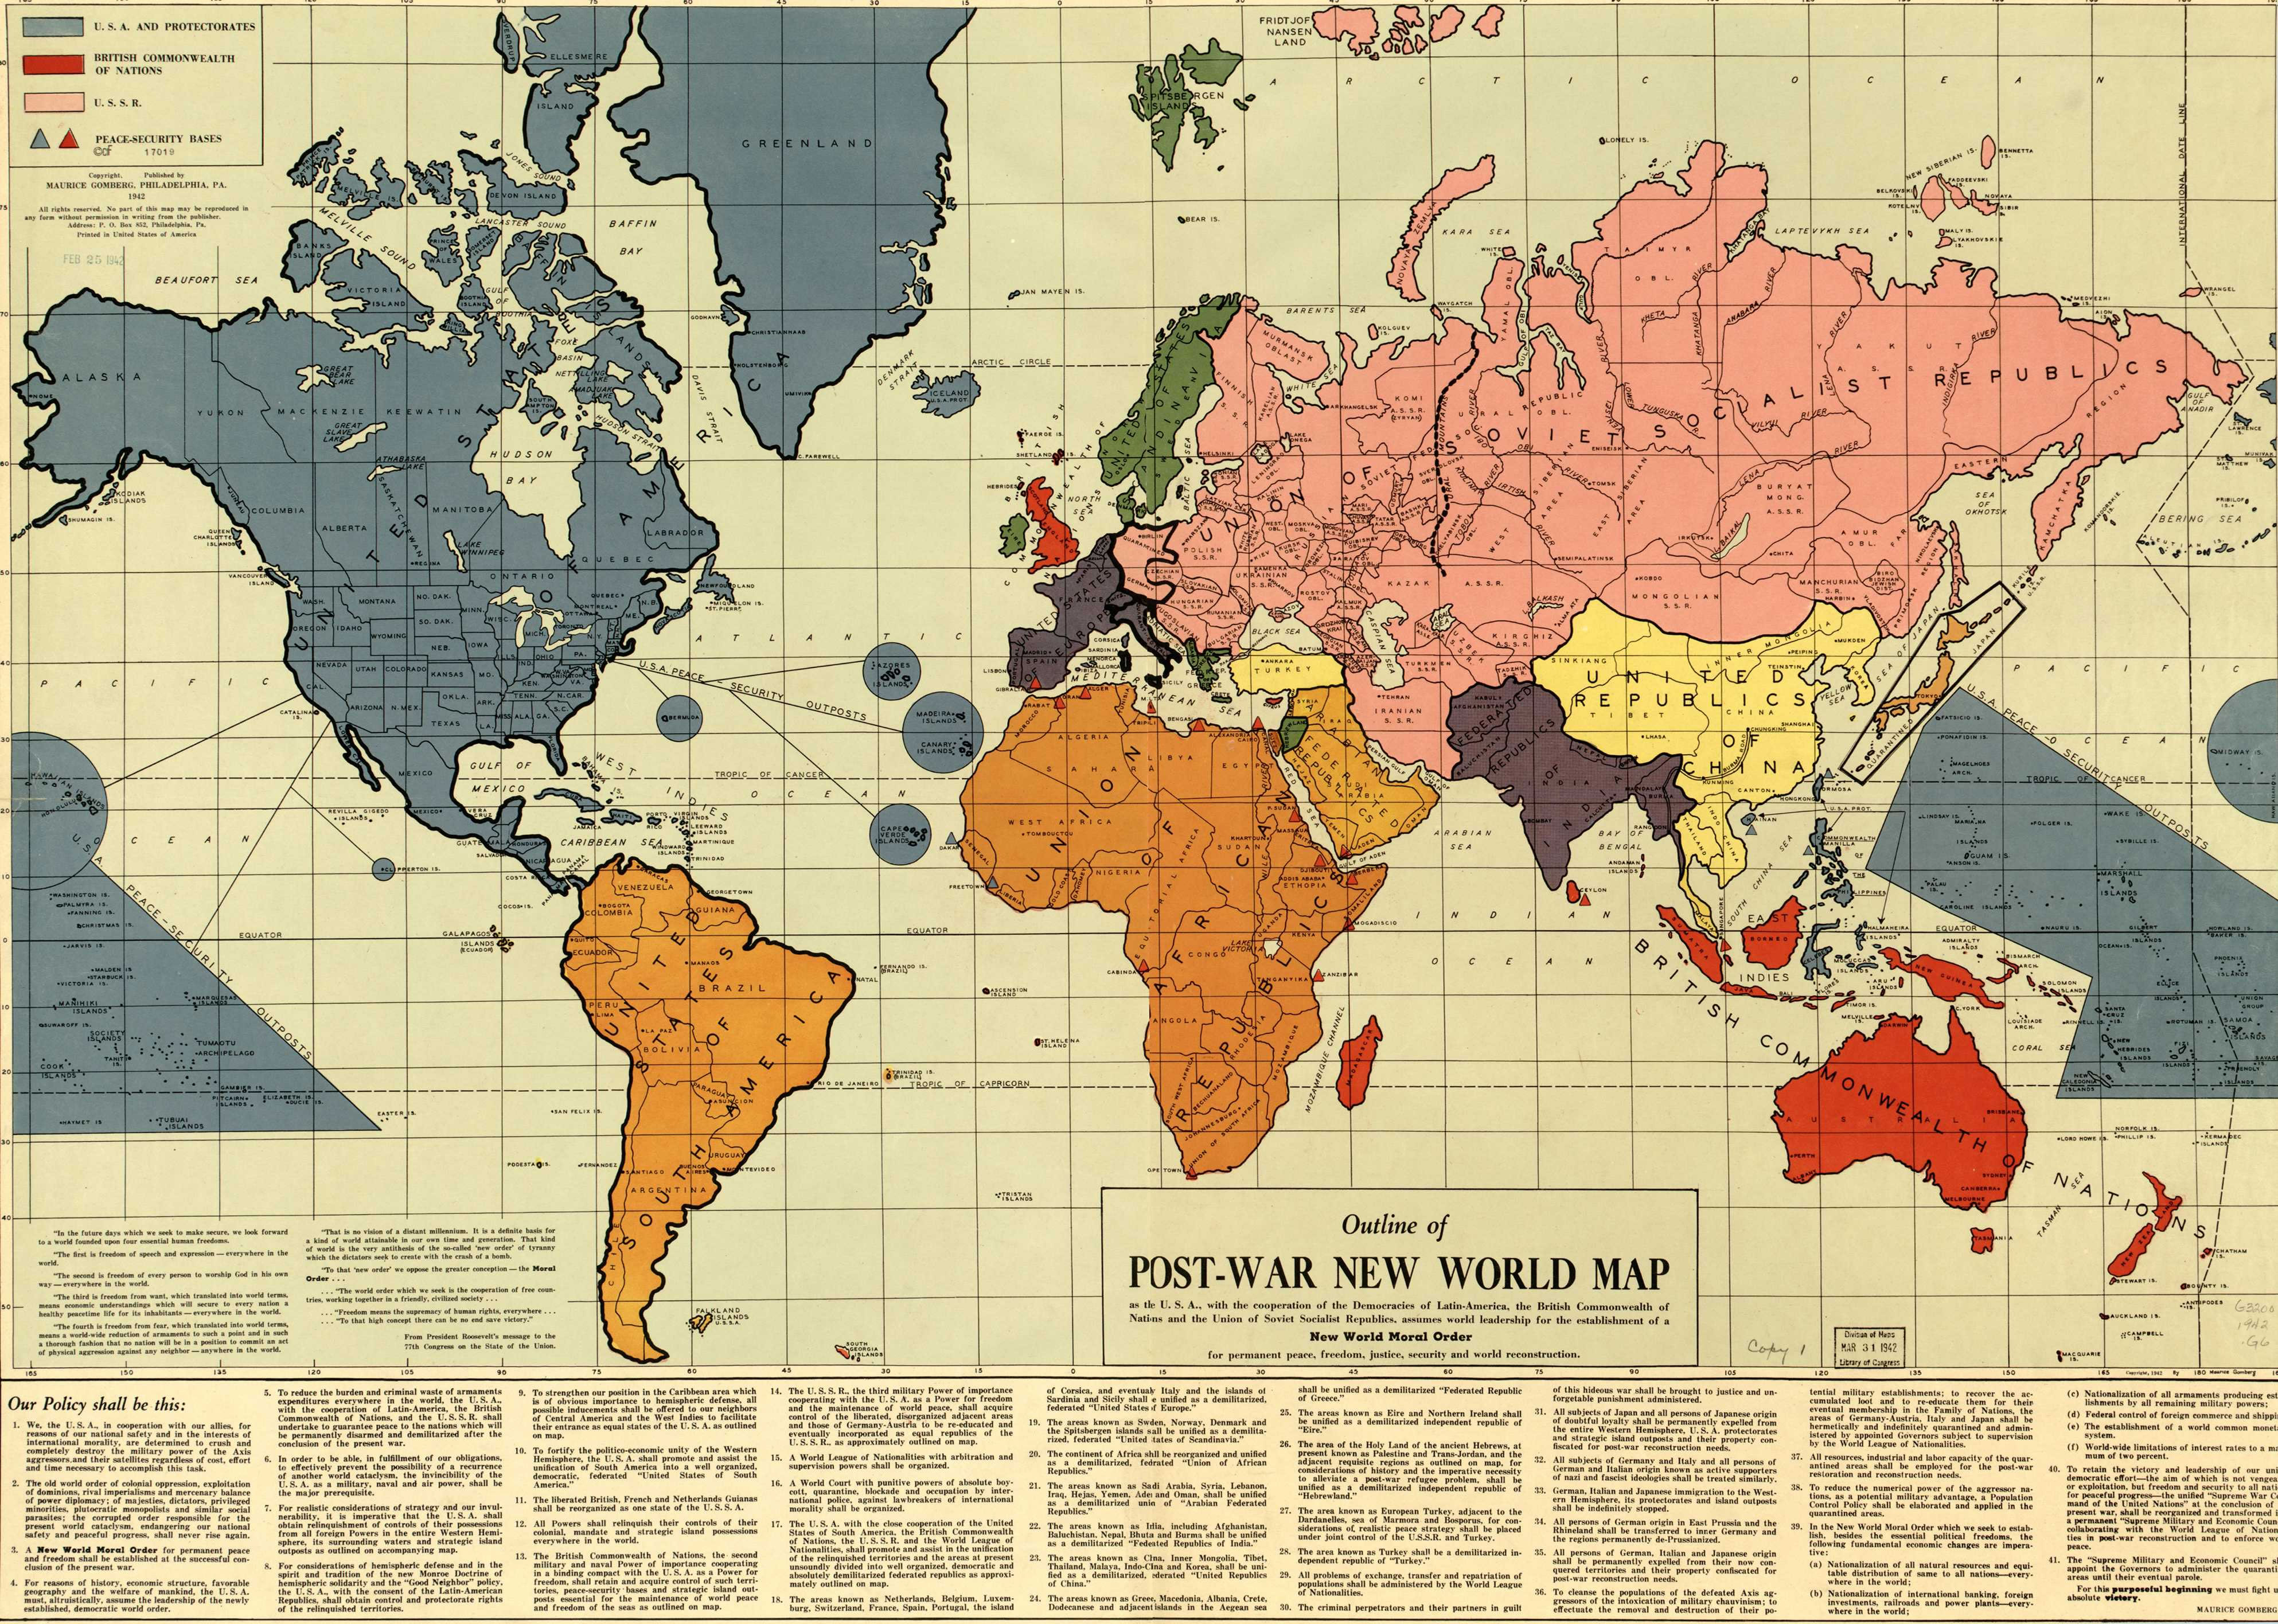 Outline of the Post-War New World Map